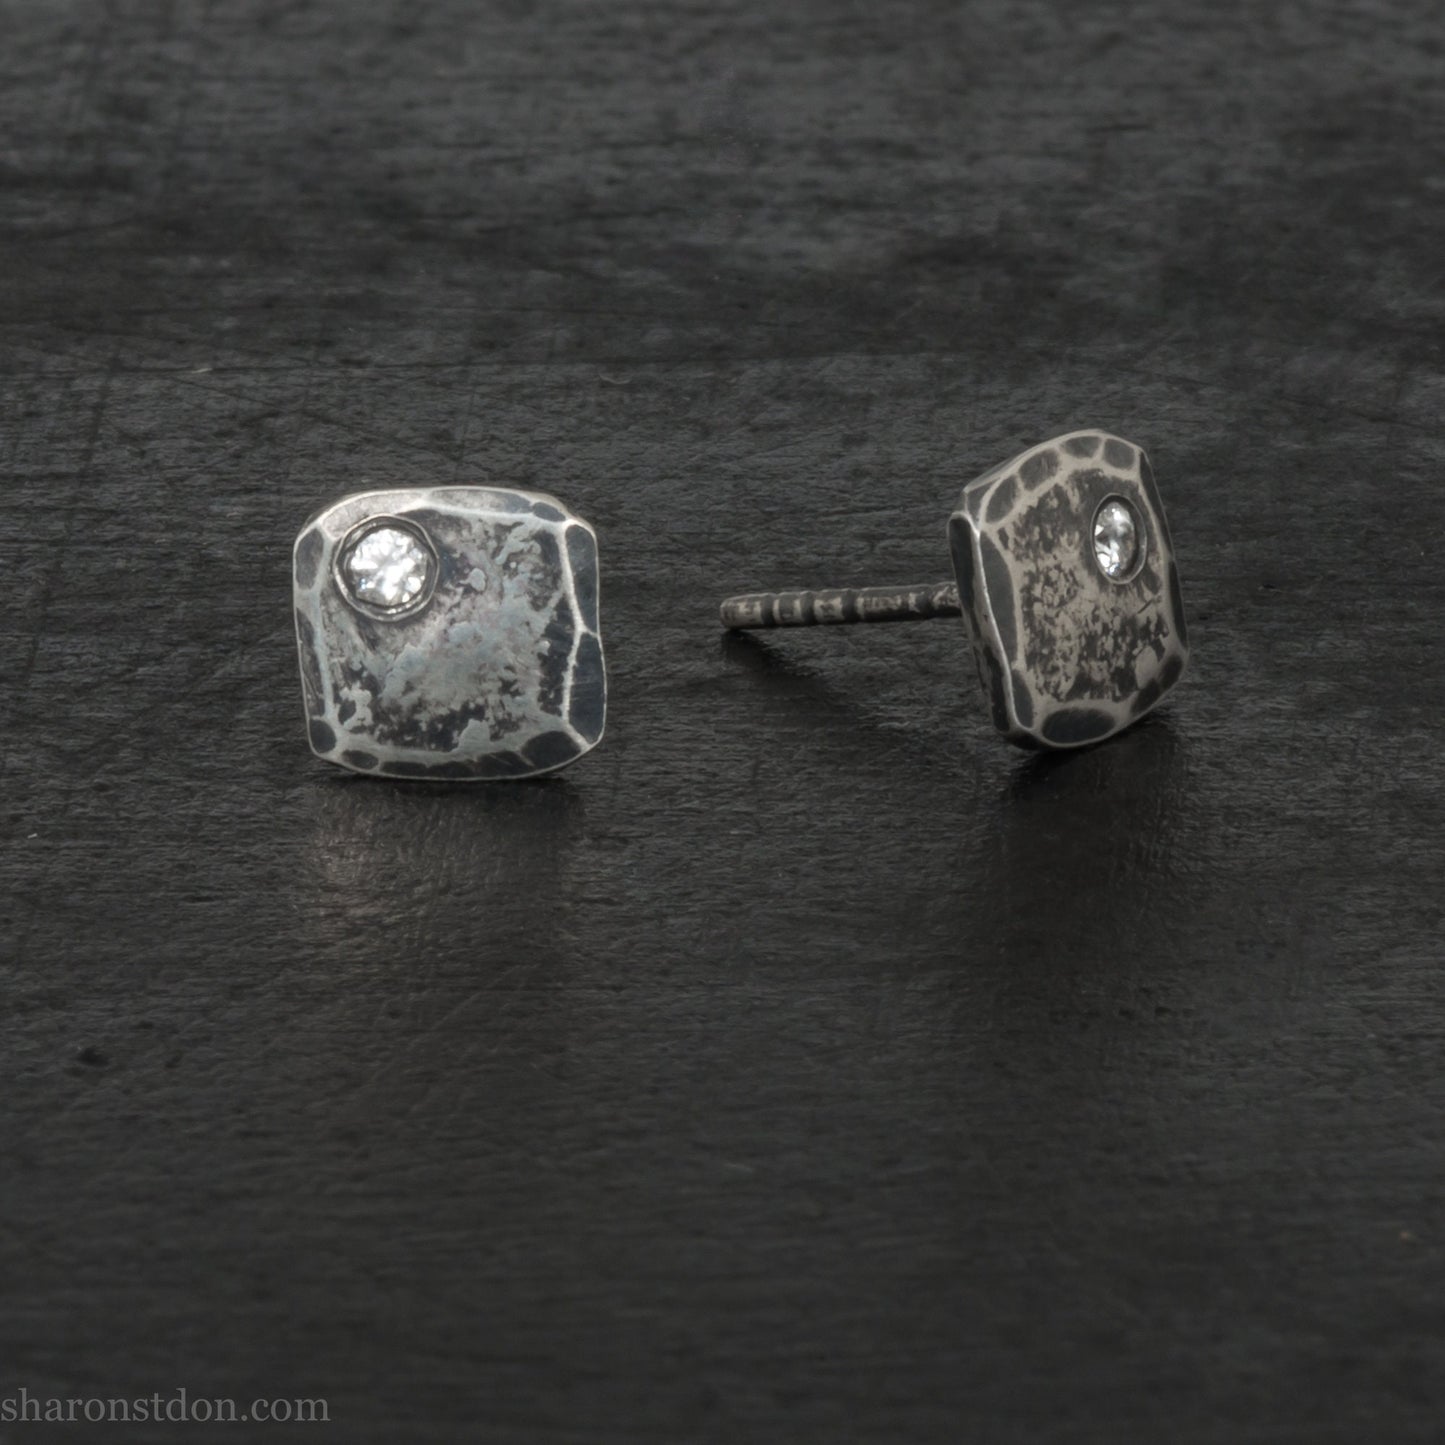 7mm square, handmade 925 sterling silver stud earrings with Canadamark brand Canadian diamond in the corner. Dark, antique finish, Handmade by Sharon SaintDon in North America.